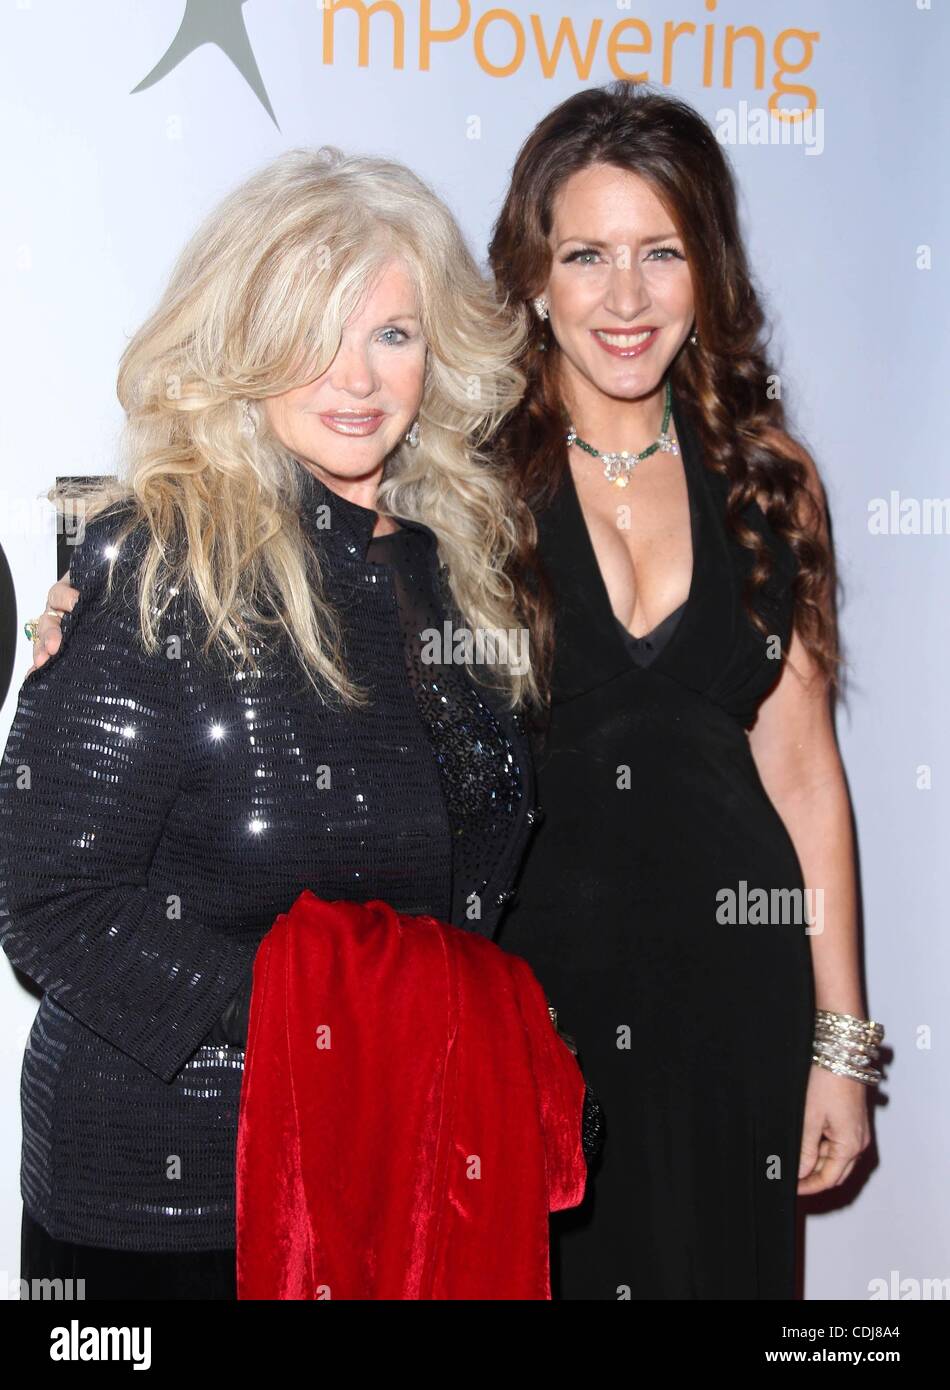 Feb 18, 2011 - Los Angeles, California, USA - Actress CONNIE STEVENS, Actress JOELY FISHER at the Global Action Awards Gala held at the Beverly Hilton Hotel, Los Angeles. (Credit Image: © Jeff Frank/ZUMAPRESS.com) Stock Photo